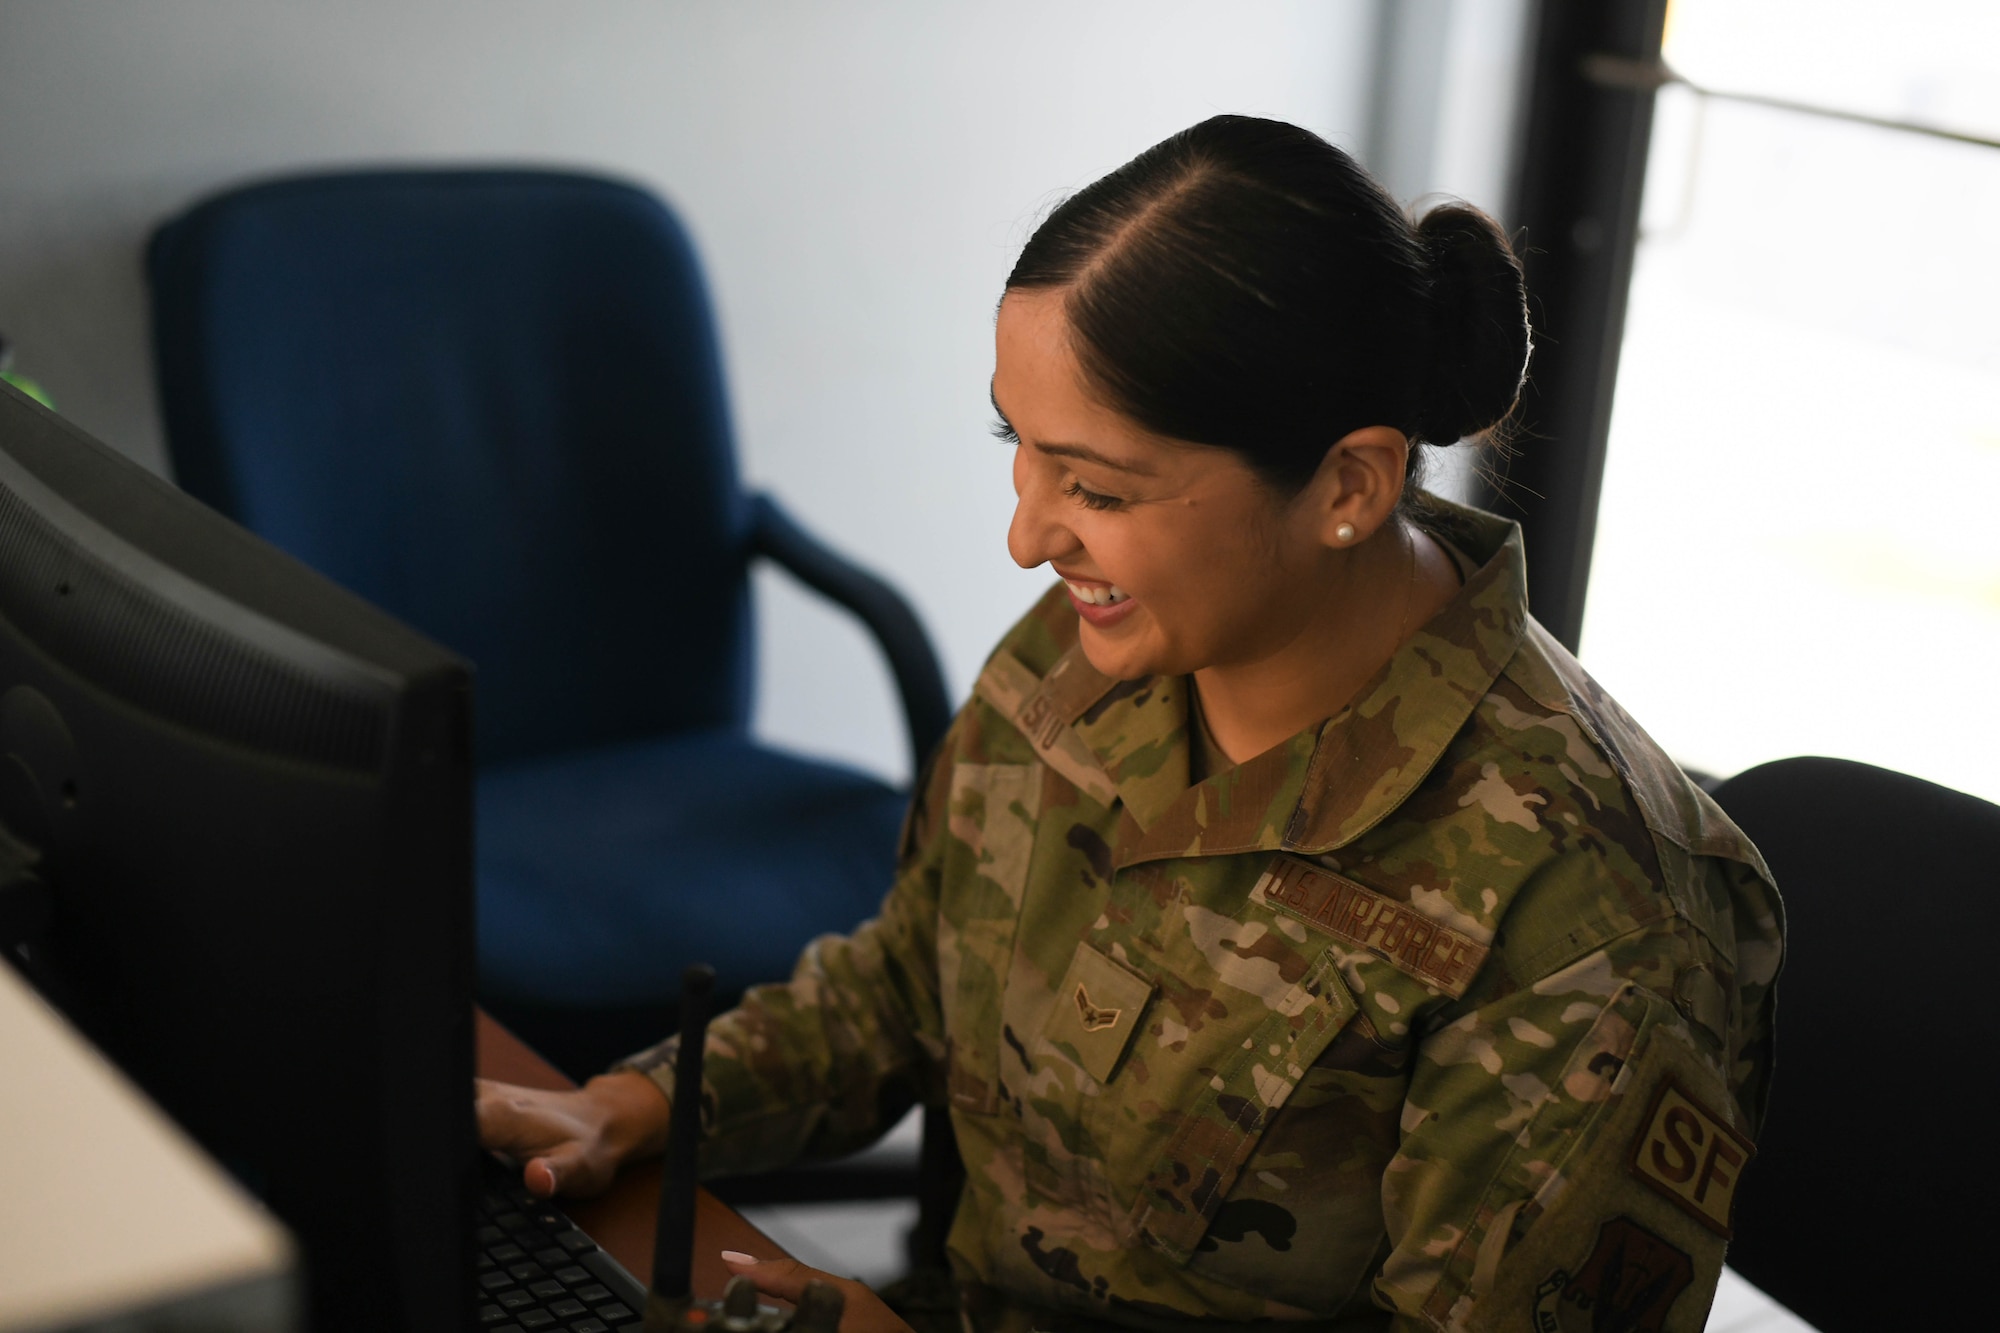 Airman 1st Class Jocelyn Soto smiles as she types on a computer.